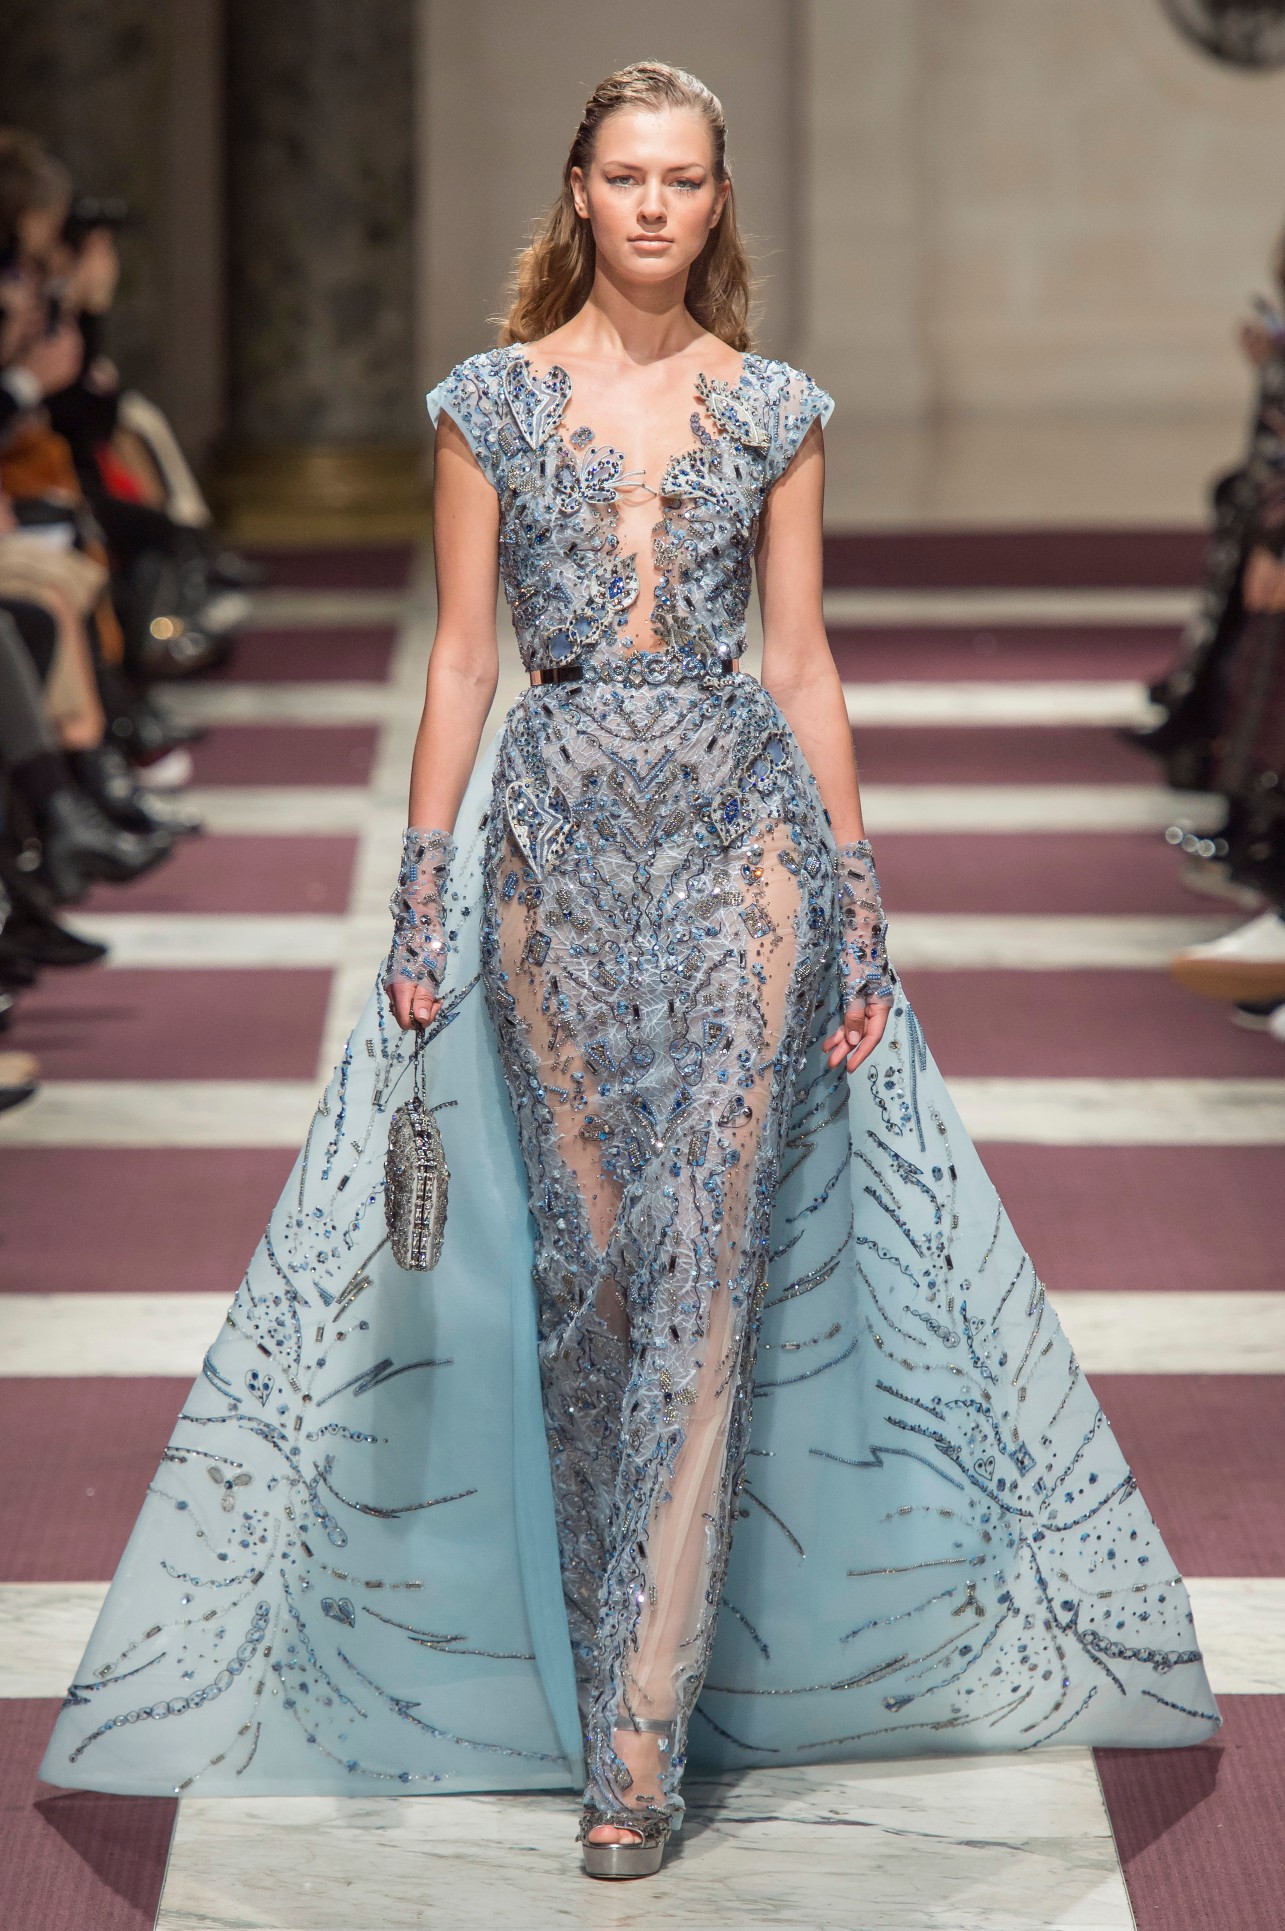 Spring 2019 Haute Couture: Ziad Nakad's Orion — CoutureNotebook